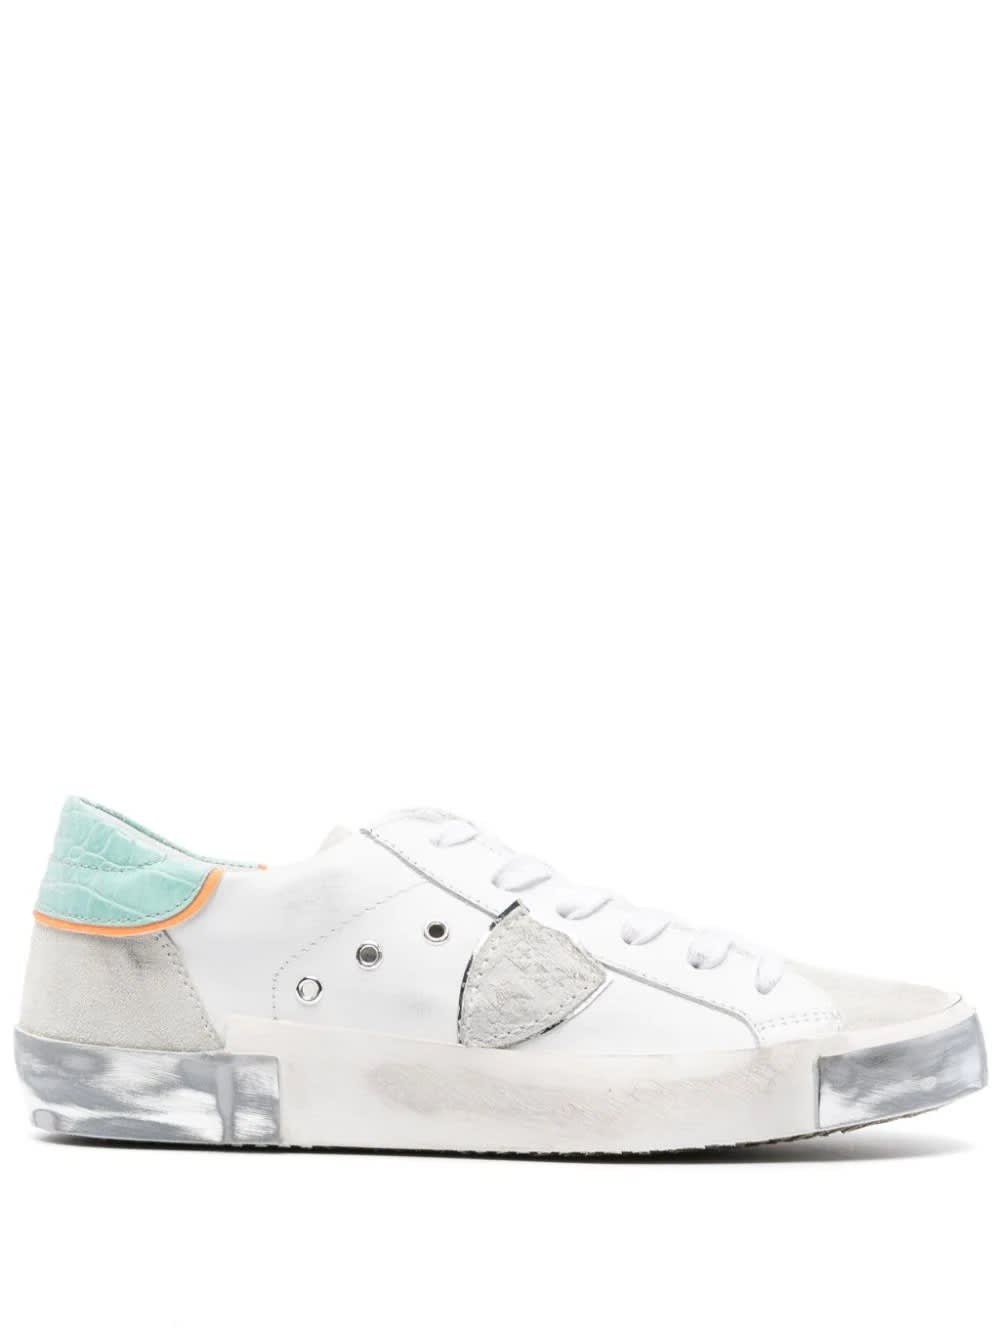 Prsx Low Sneakers - White And Aquamarine